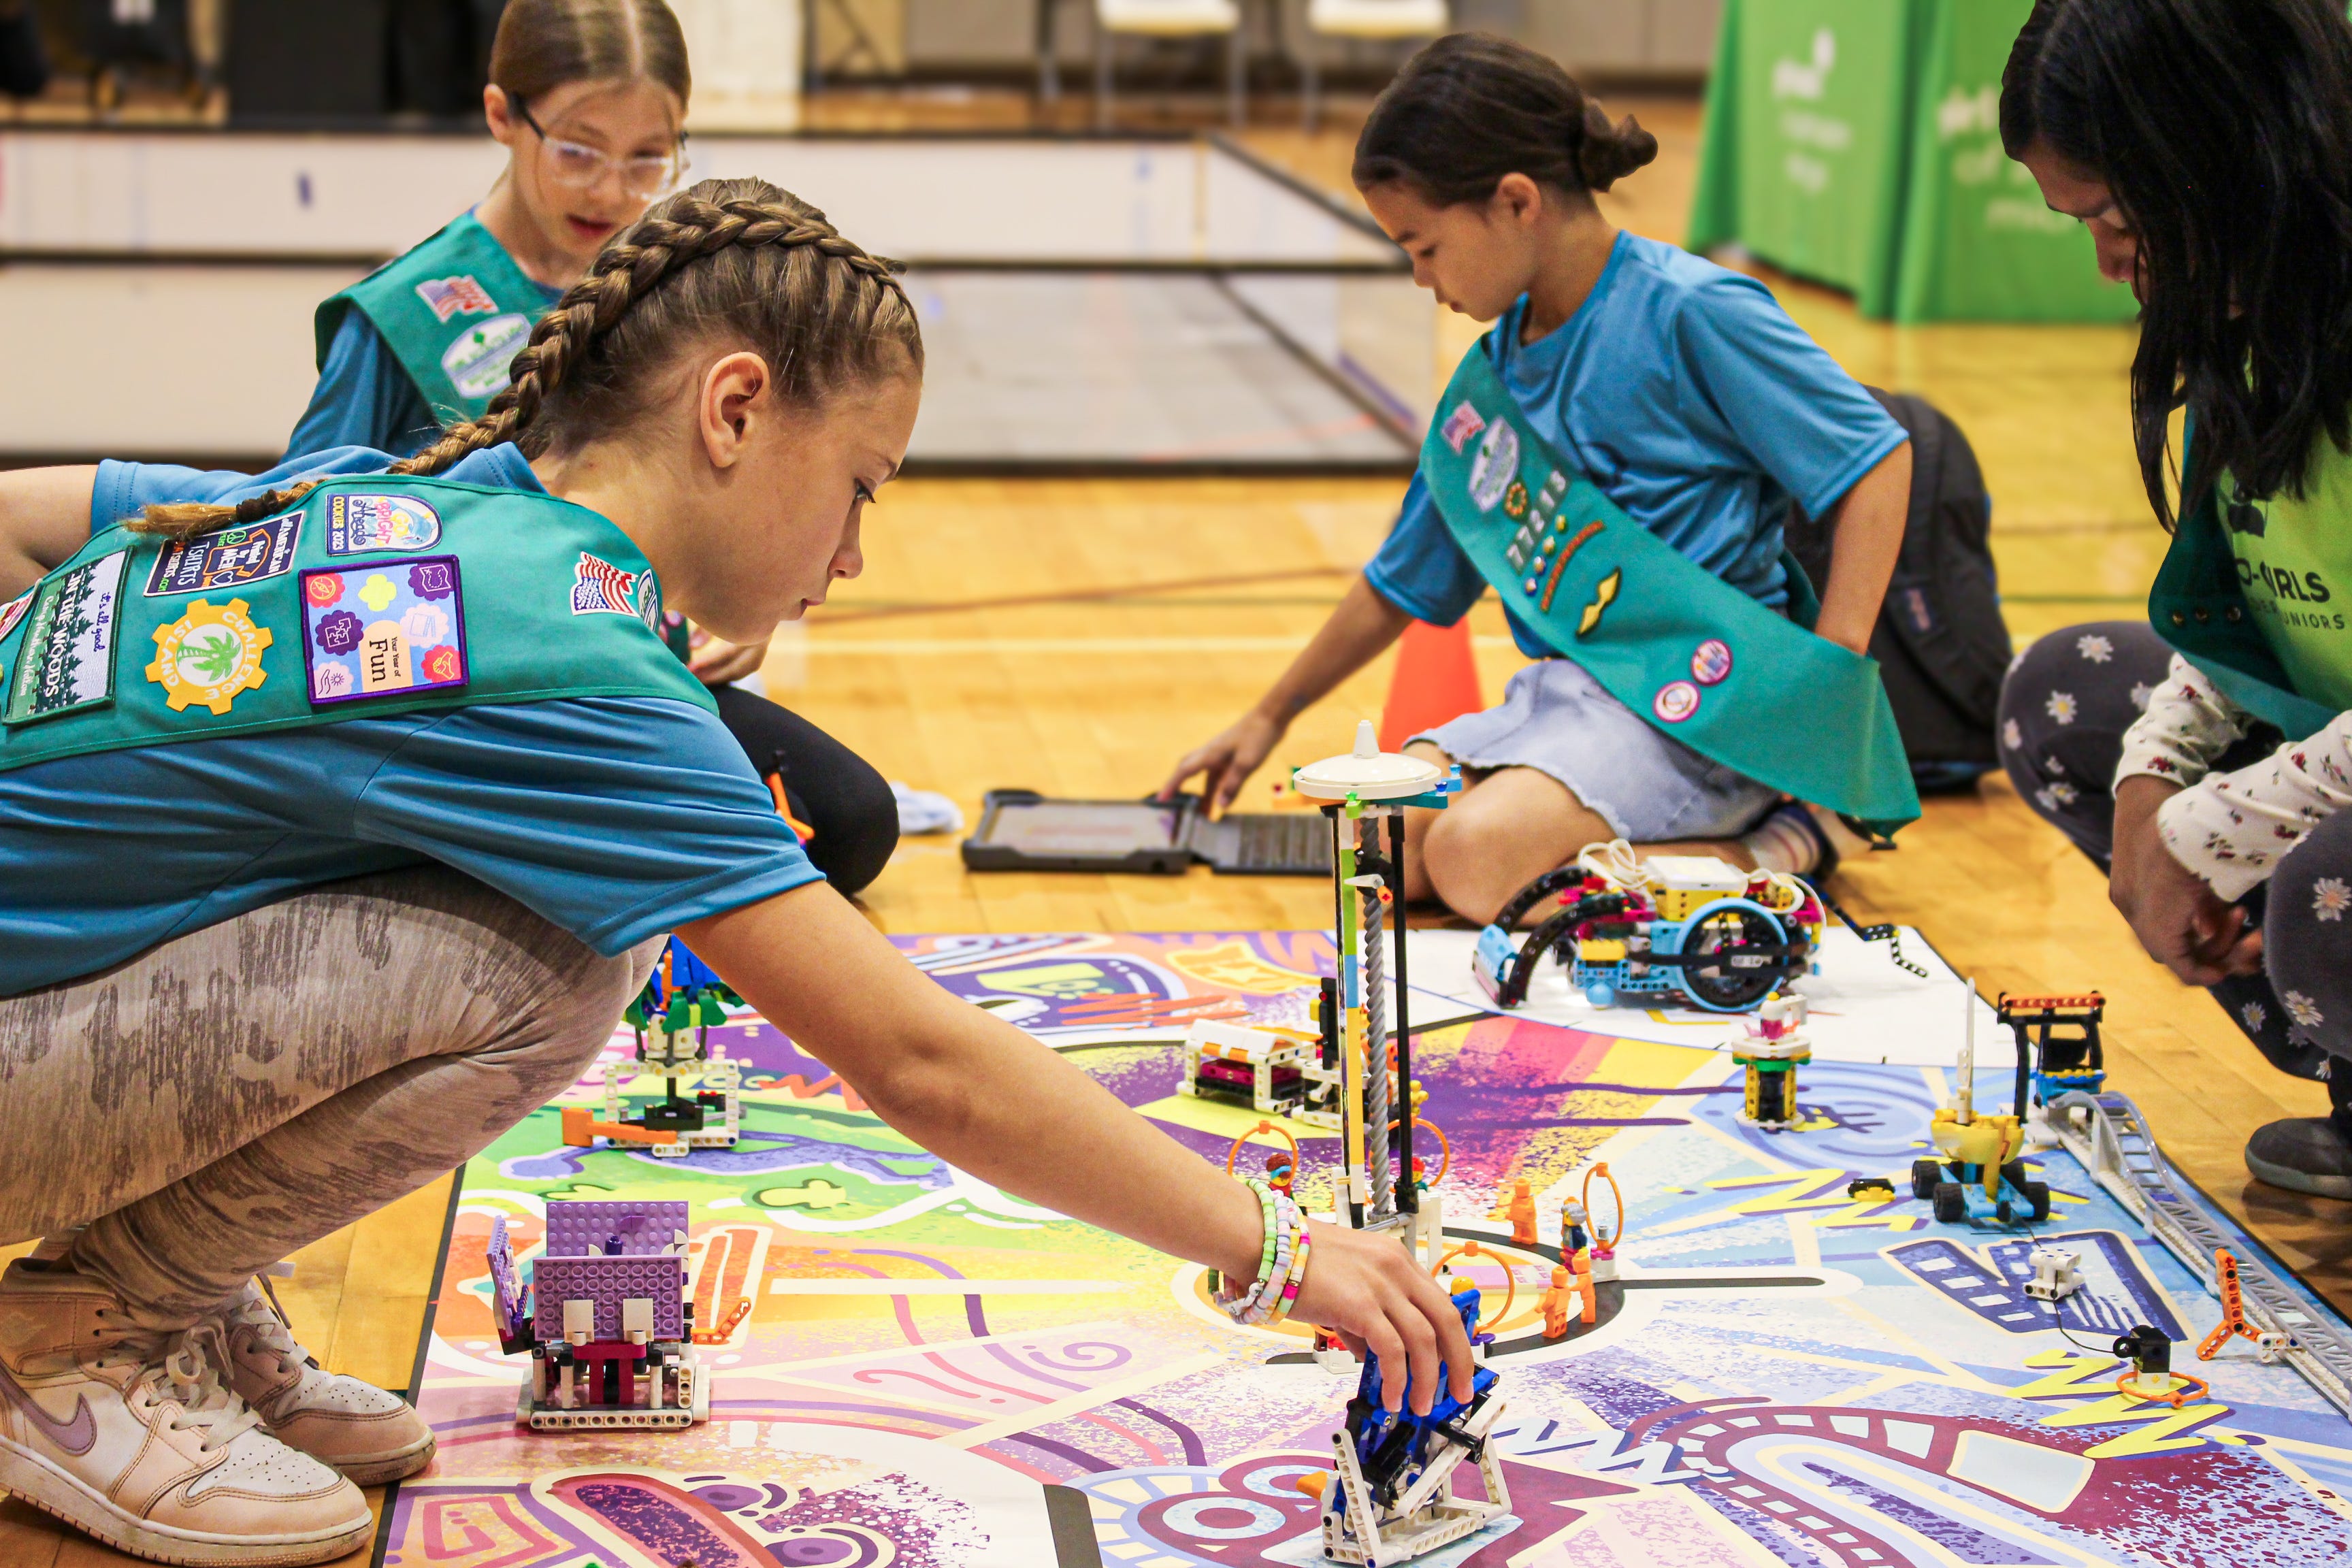 Activities like a May 4 Robotics Expo presented by the Girl Scouts of Southeastern Michigan (GSSEM) and FIRST (For Inspiration and Recognition of Science and Technology) make the case that Girl Scouts are "more than cookies," says Monica Woodson, CEO of GSSEM, which is headquartered in Detroit next to Eastern Market.